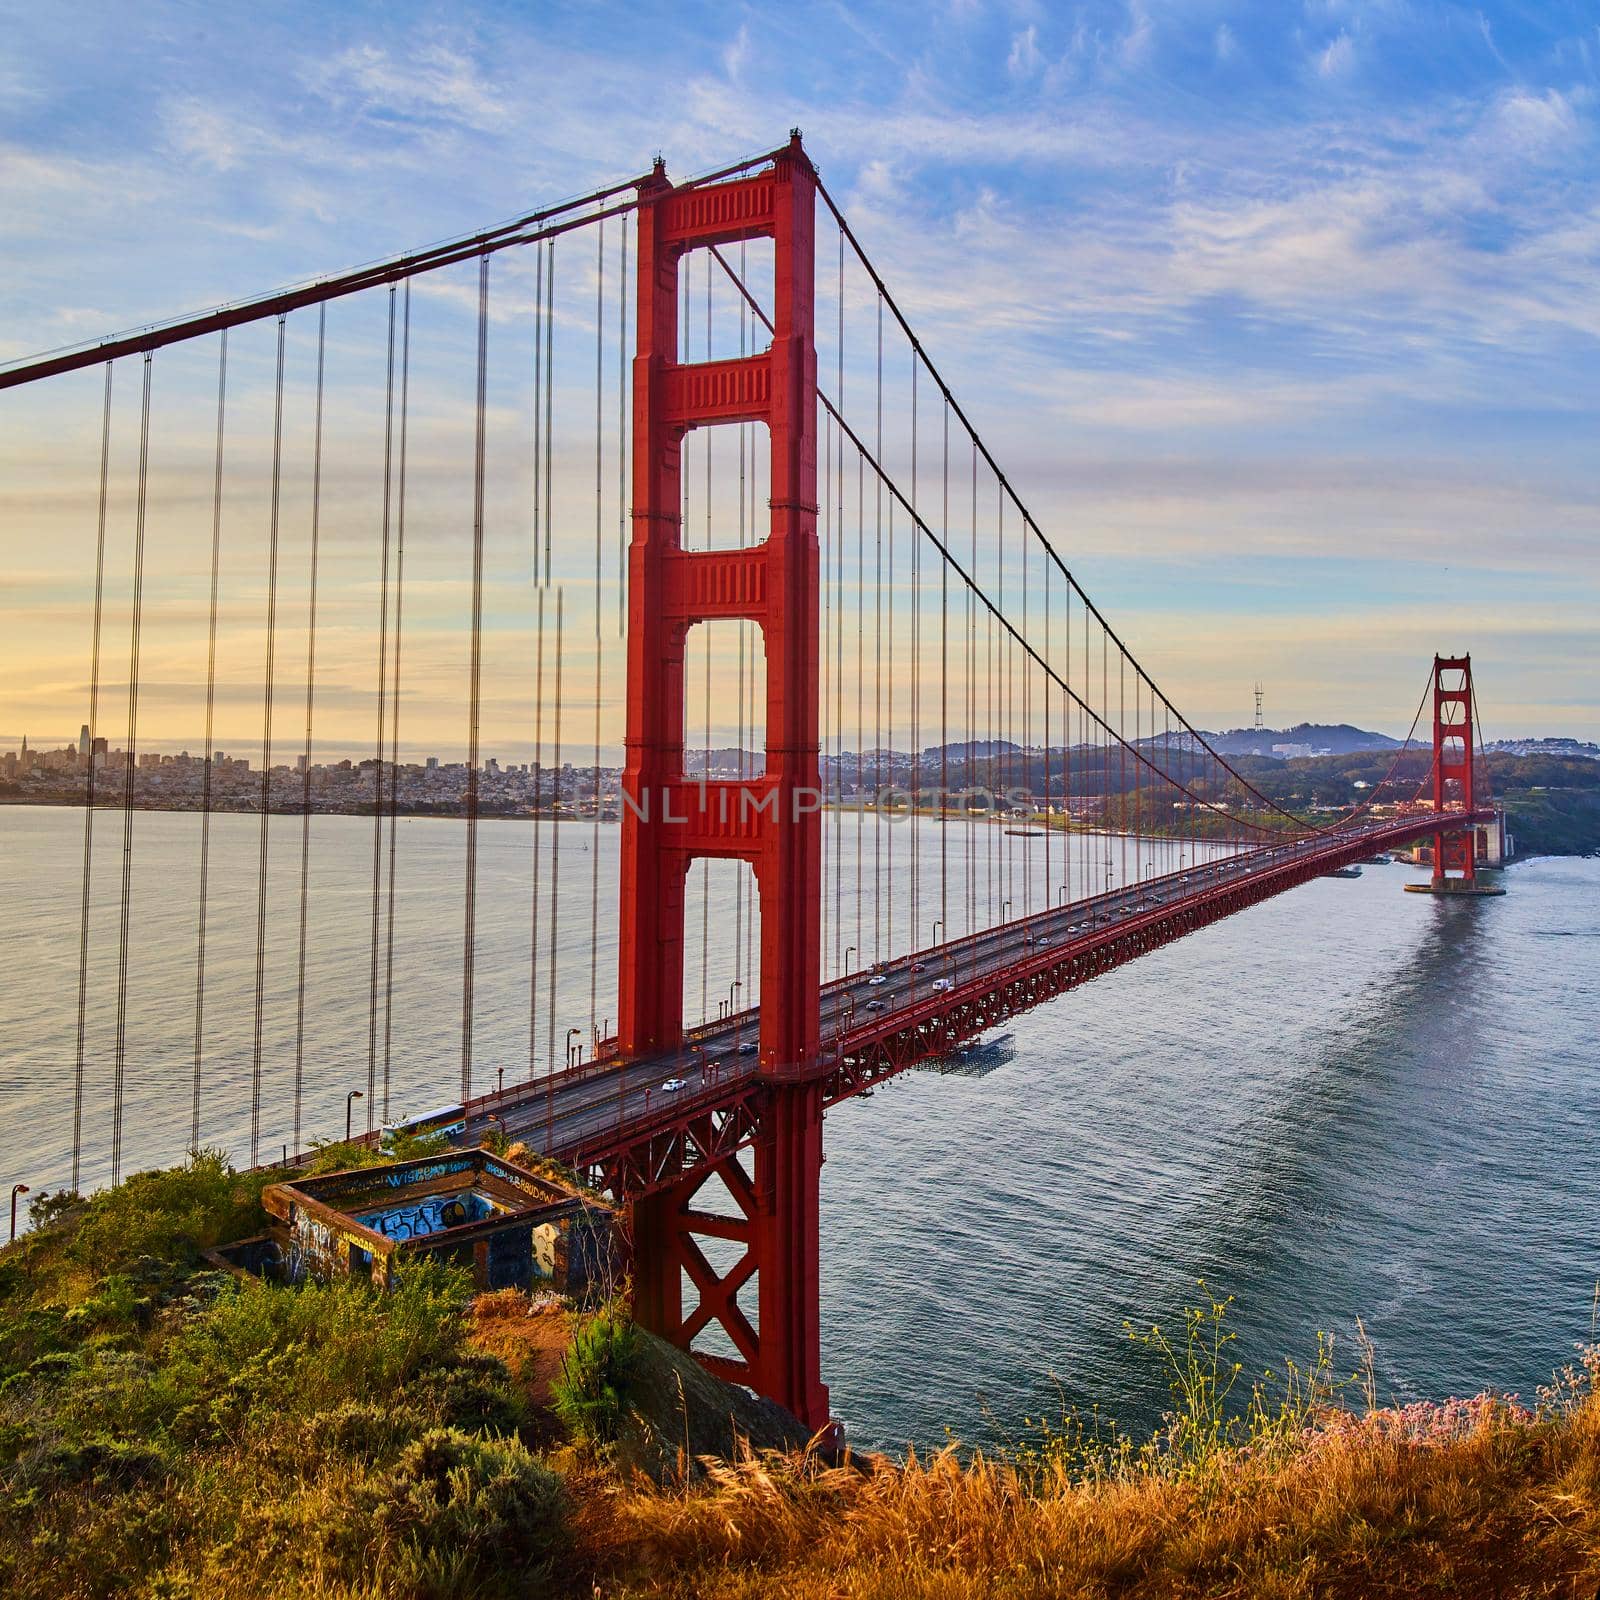 Square crop of Golden Gate Bridge in San Francisco during sunrise by njproductions